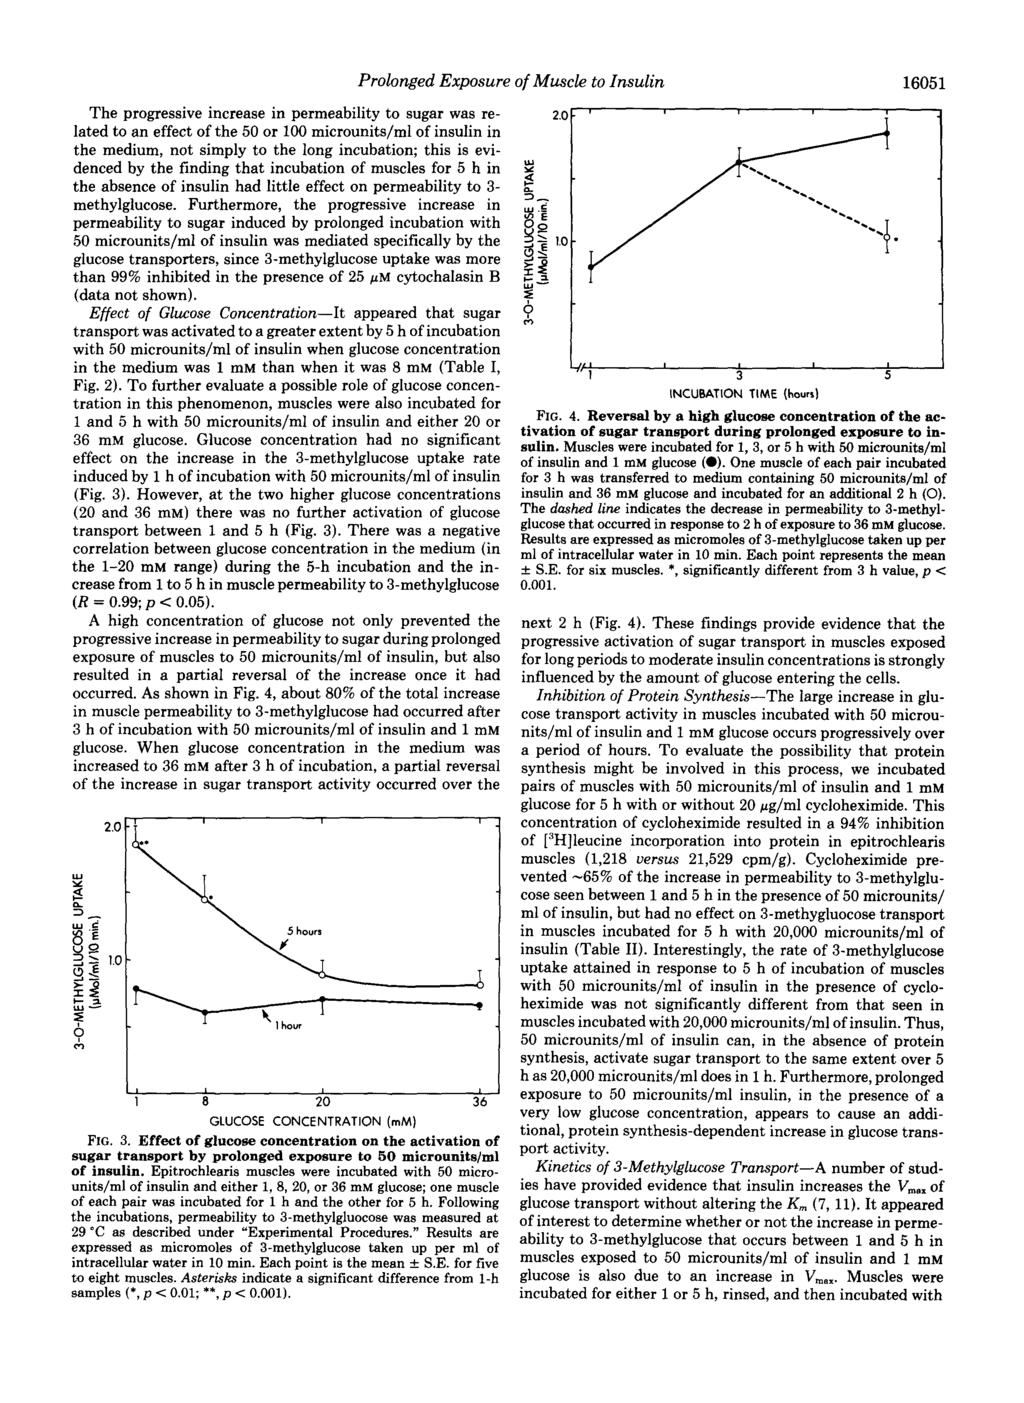 Prolonged Exposure of Muscle to nsulin 16051 The progressive increase in permeability to sugar was related to an effect of the 50 or 100 microunits/ml of insulin in the medium, not simply to the long